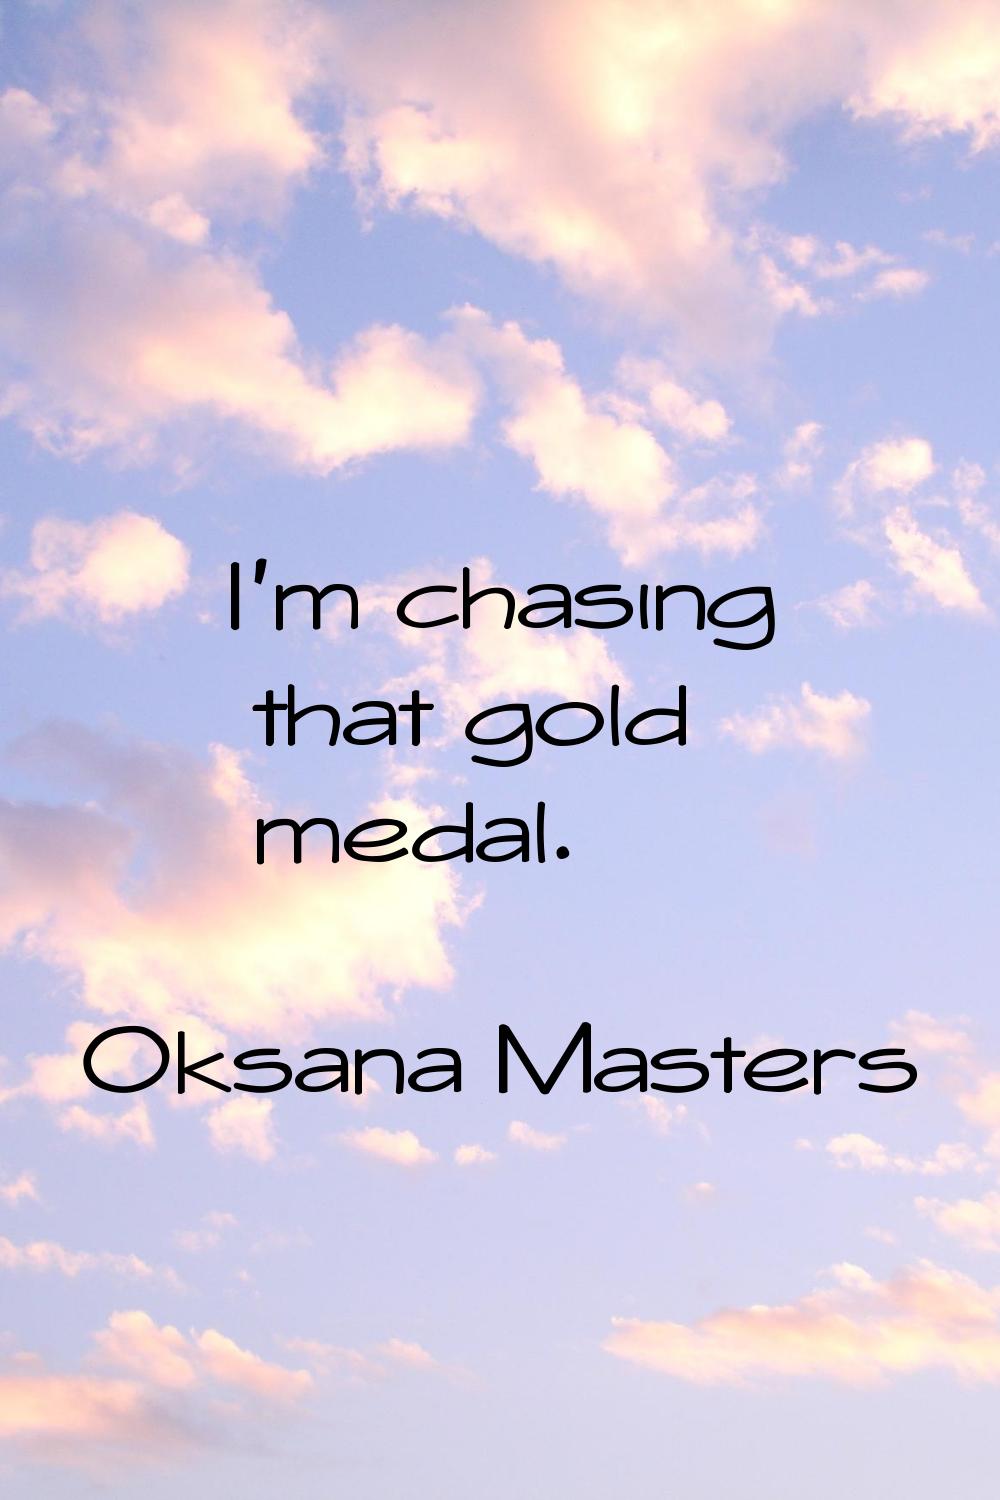 I'm chasing that gold medal.